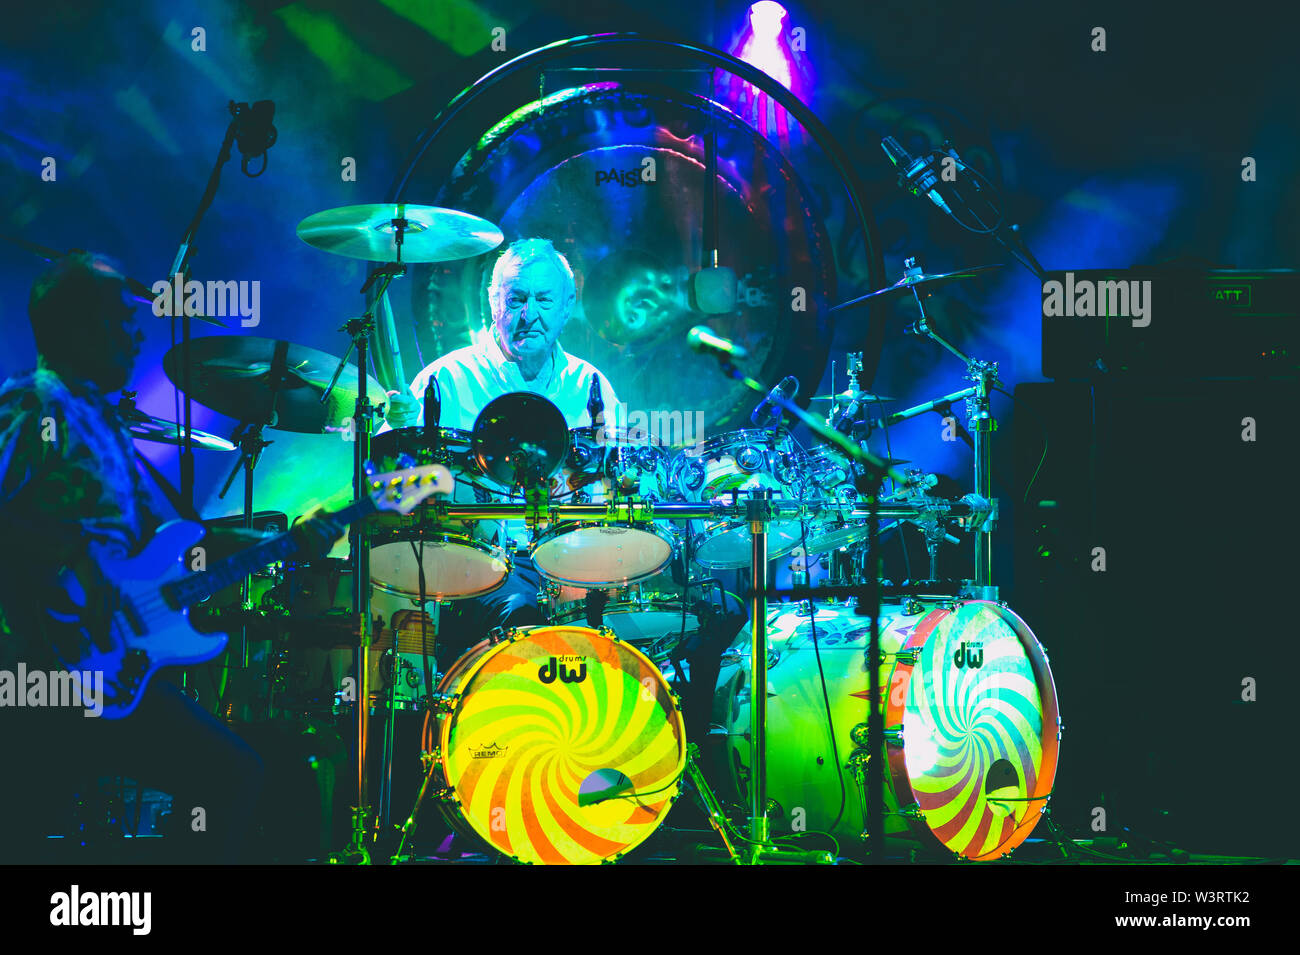 Roma, Italy. 16th July, 2019. Nick Mason's Saucerful Of Secrets, the band  led by Pink Floyd drummer, on tour this summer in Italy.Nick Mason's  Saucerful Of Secrets are formed by Nick Mason,